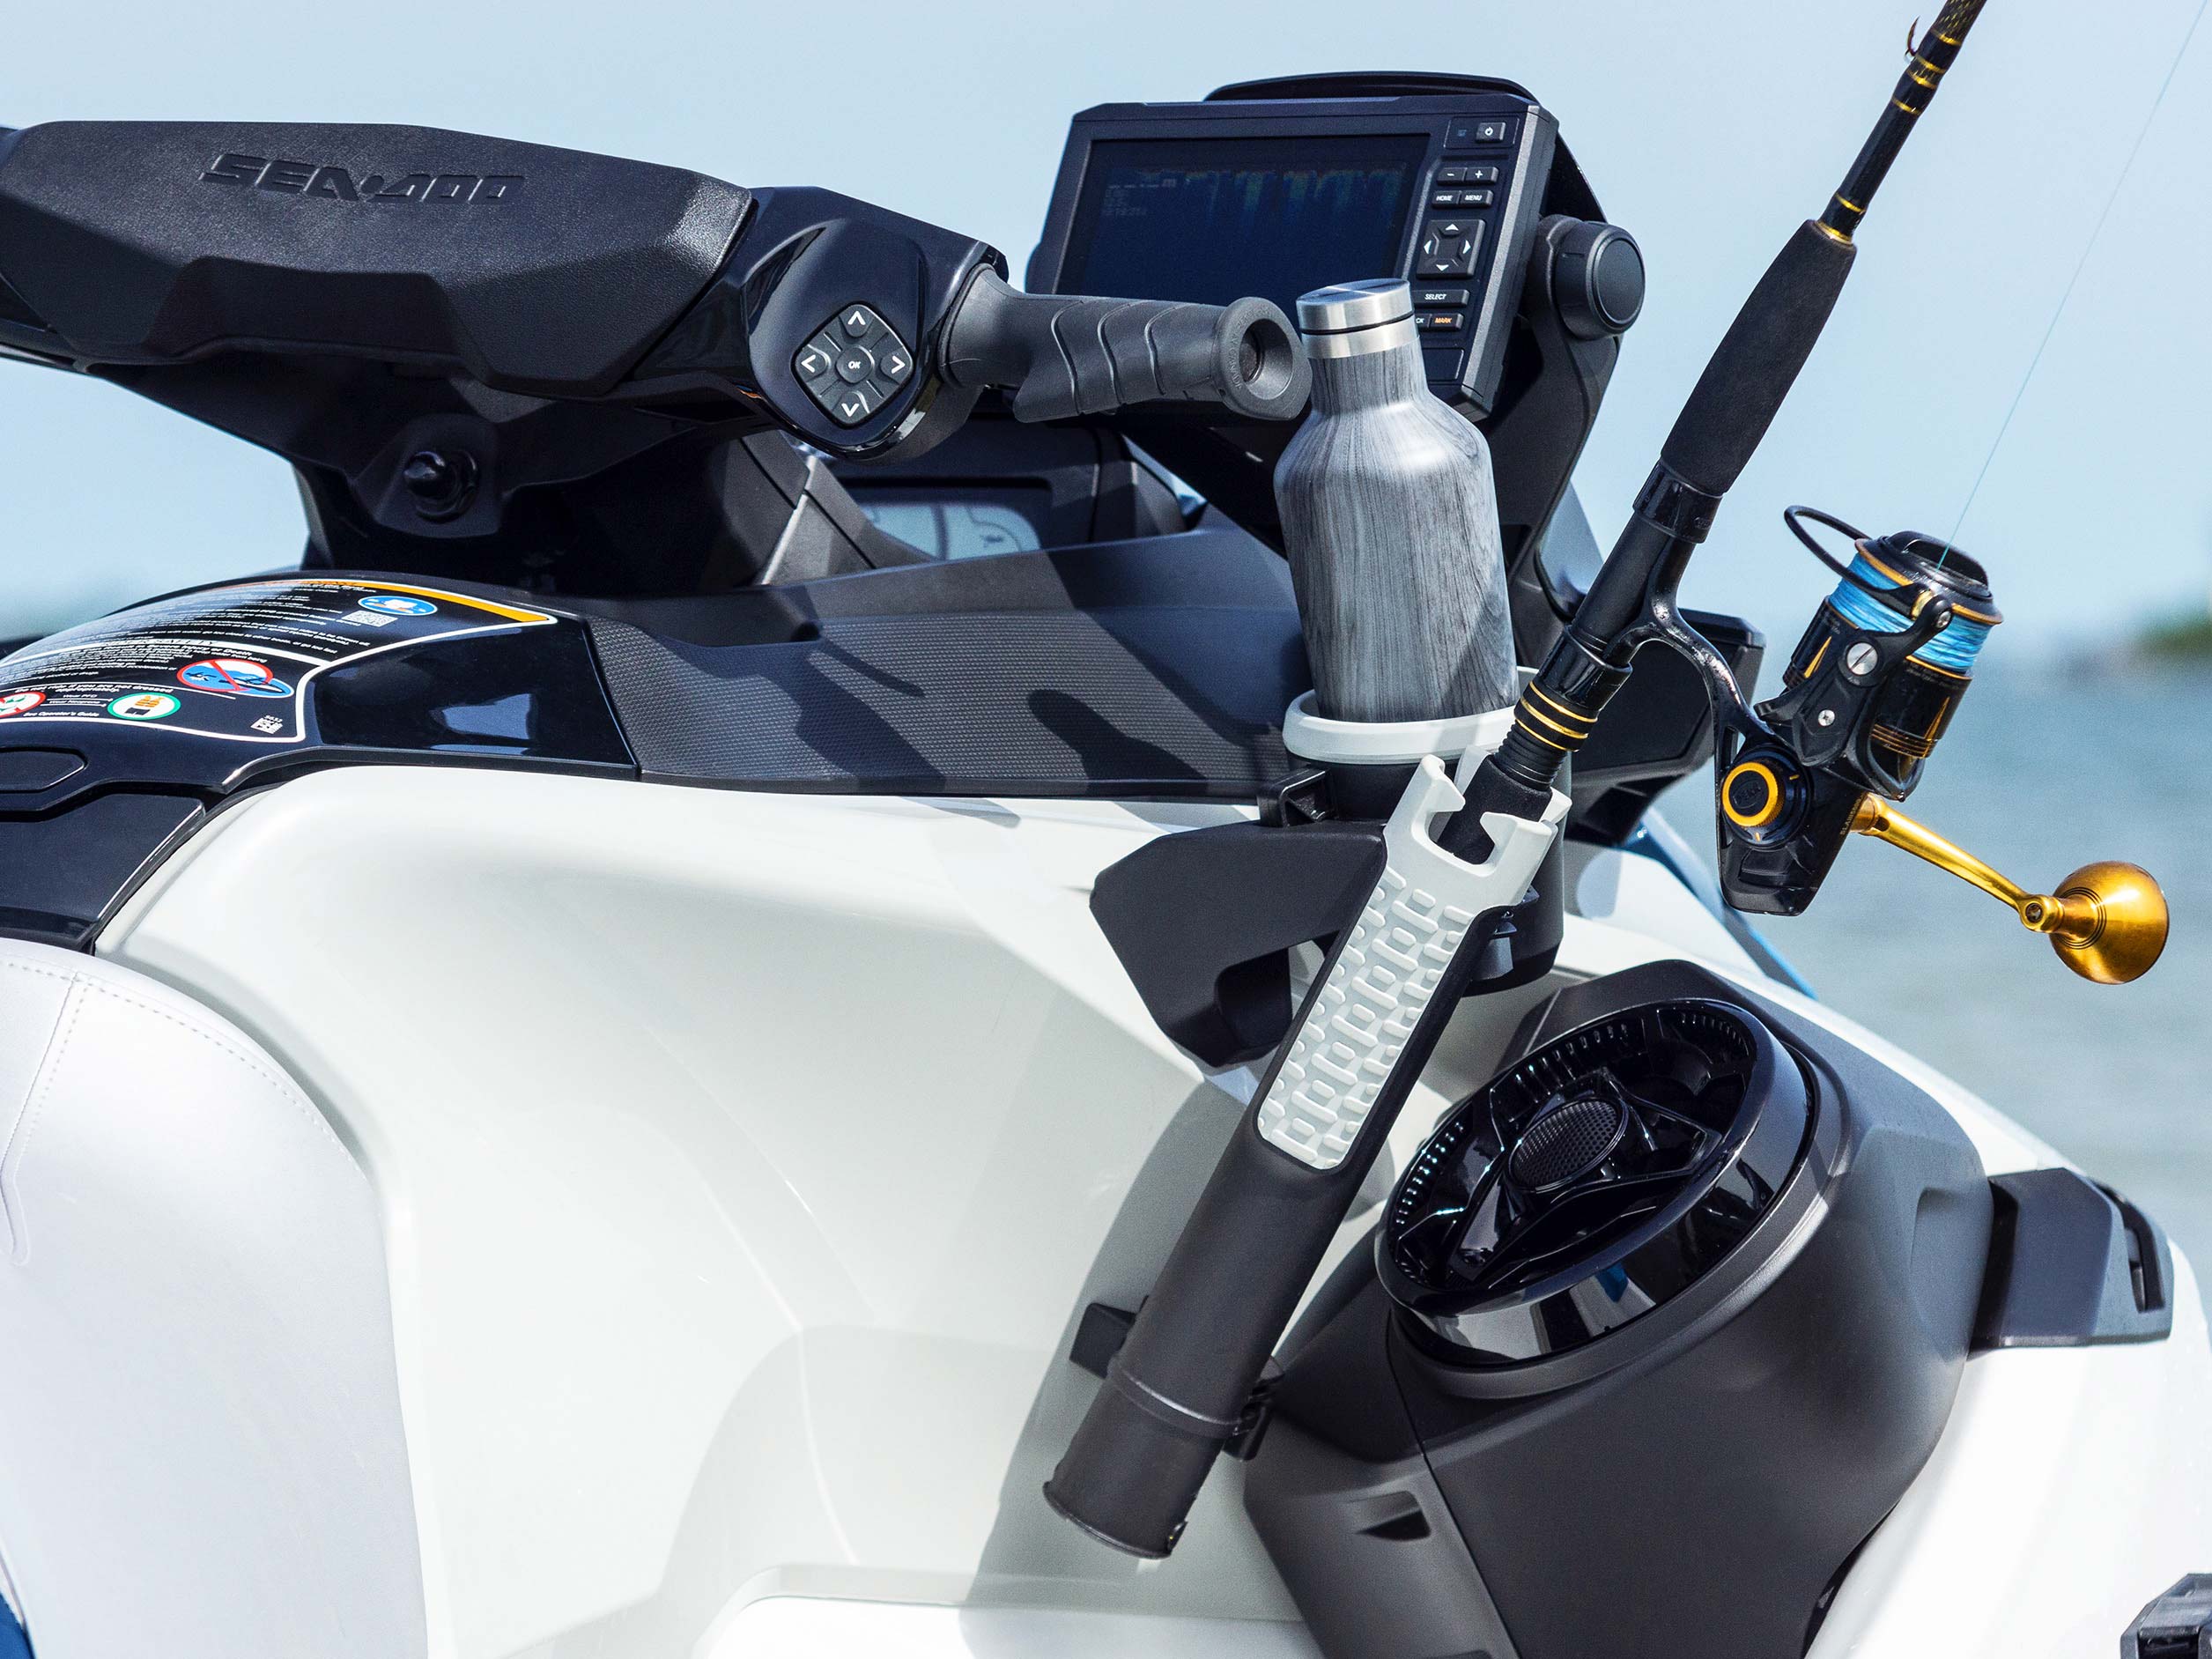 Cup and rod holder on the new Sea-Doo Fish Pro